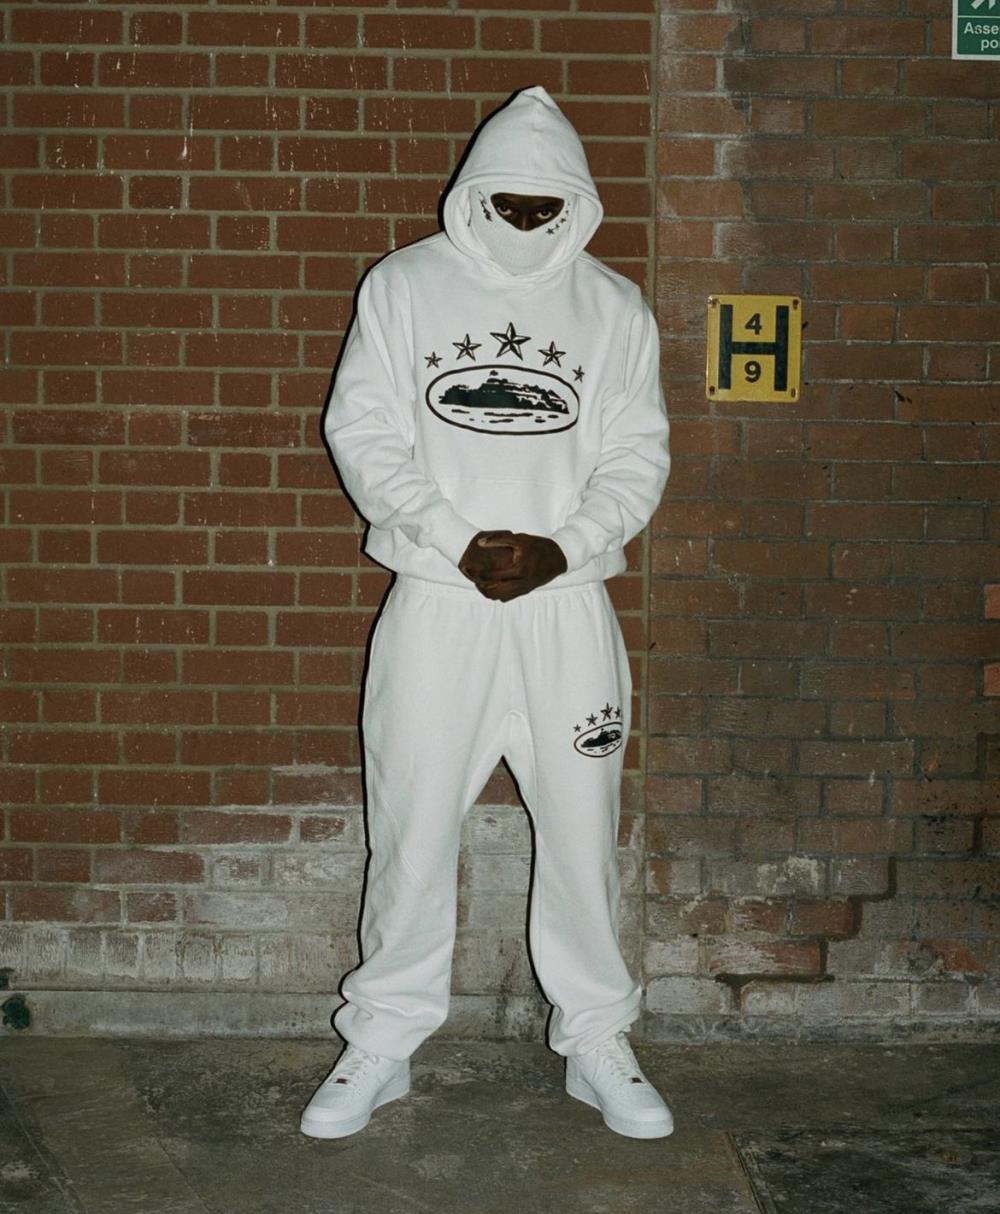 5th anniversary track suit